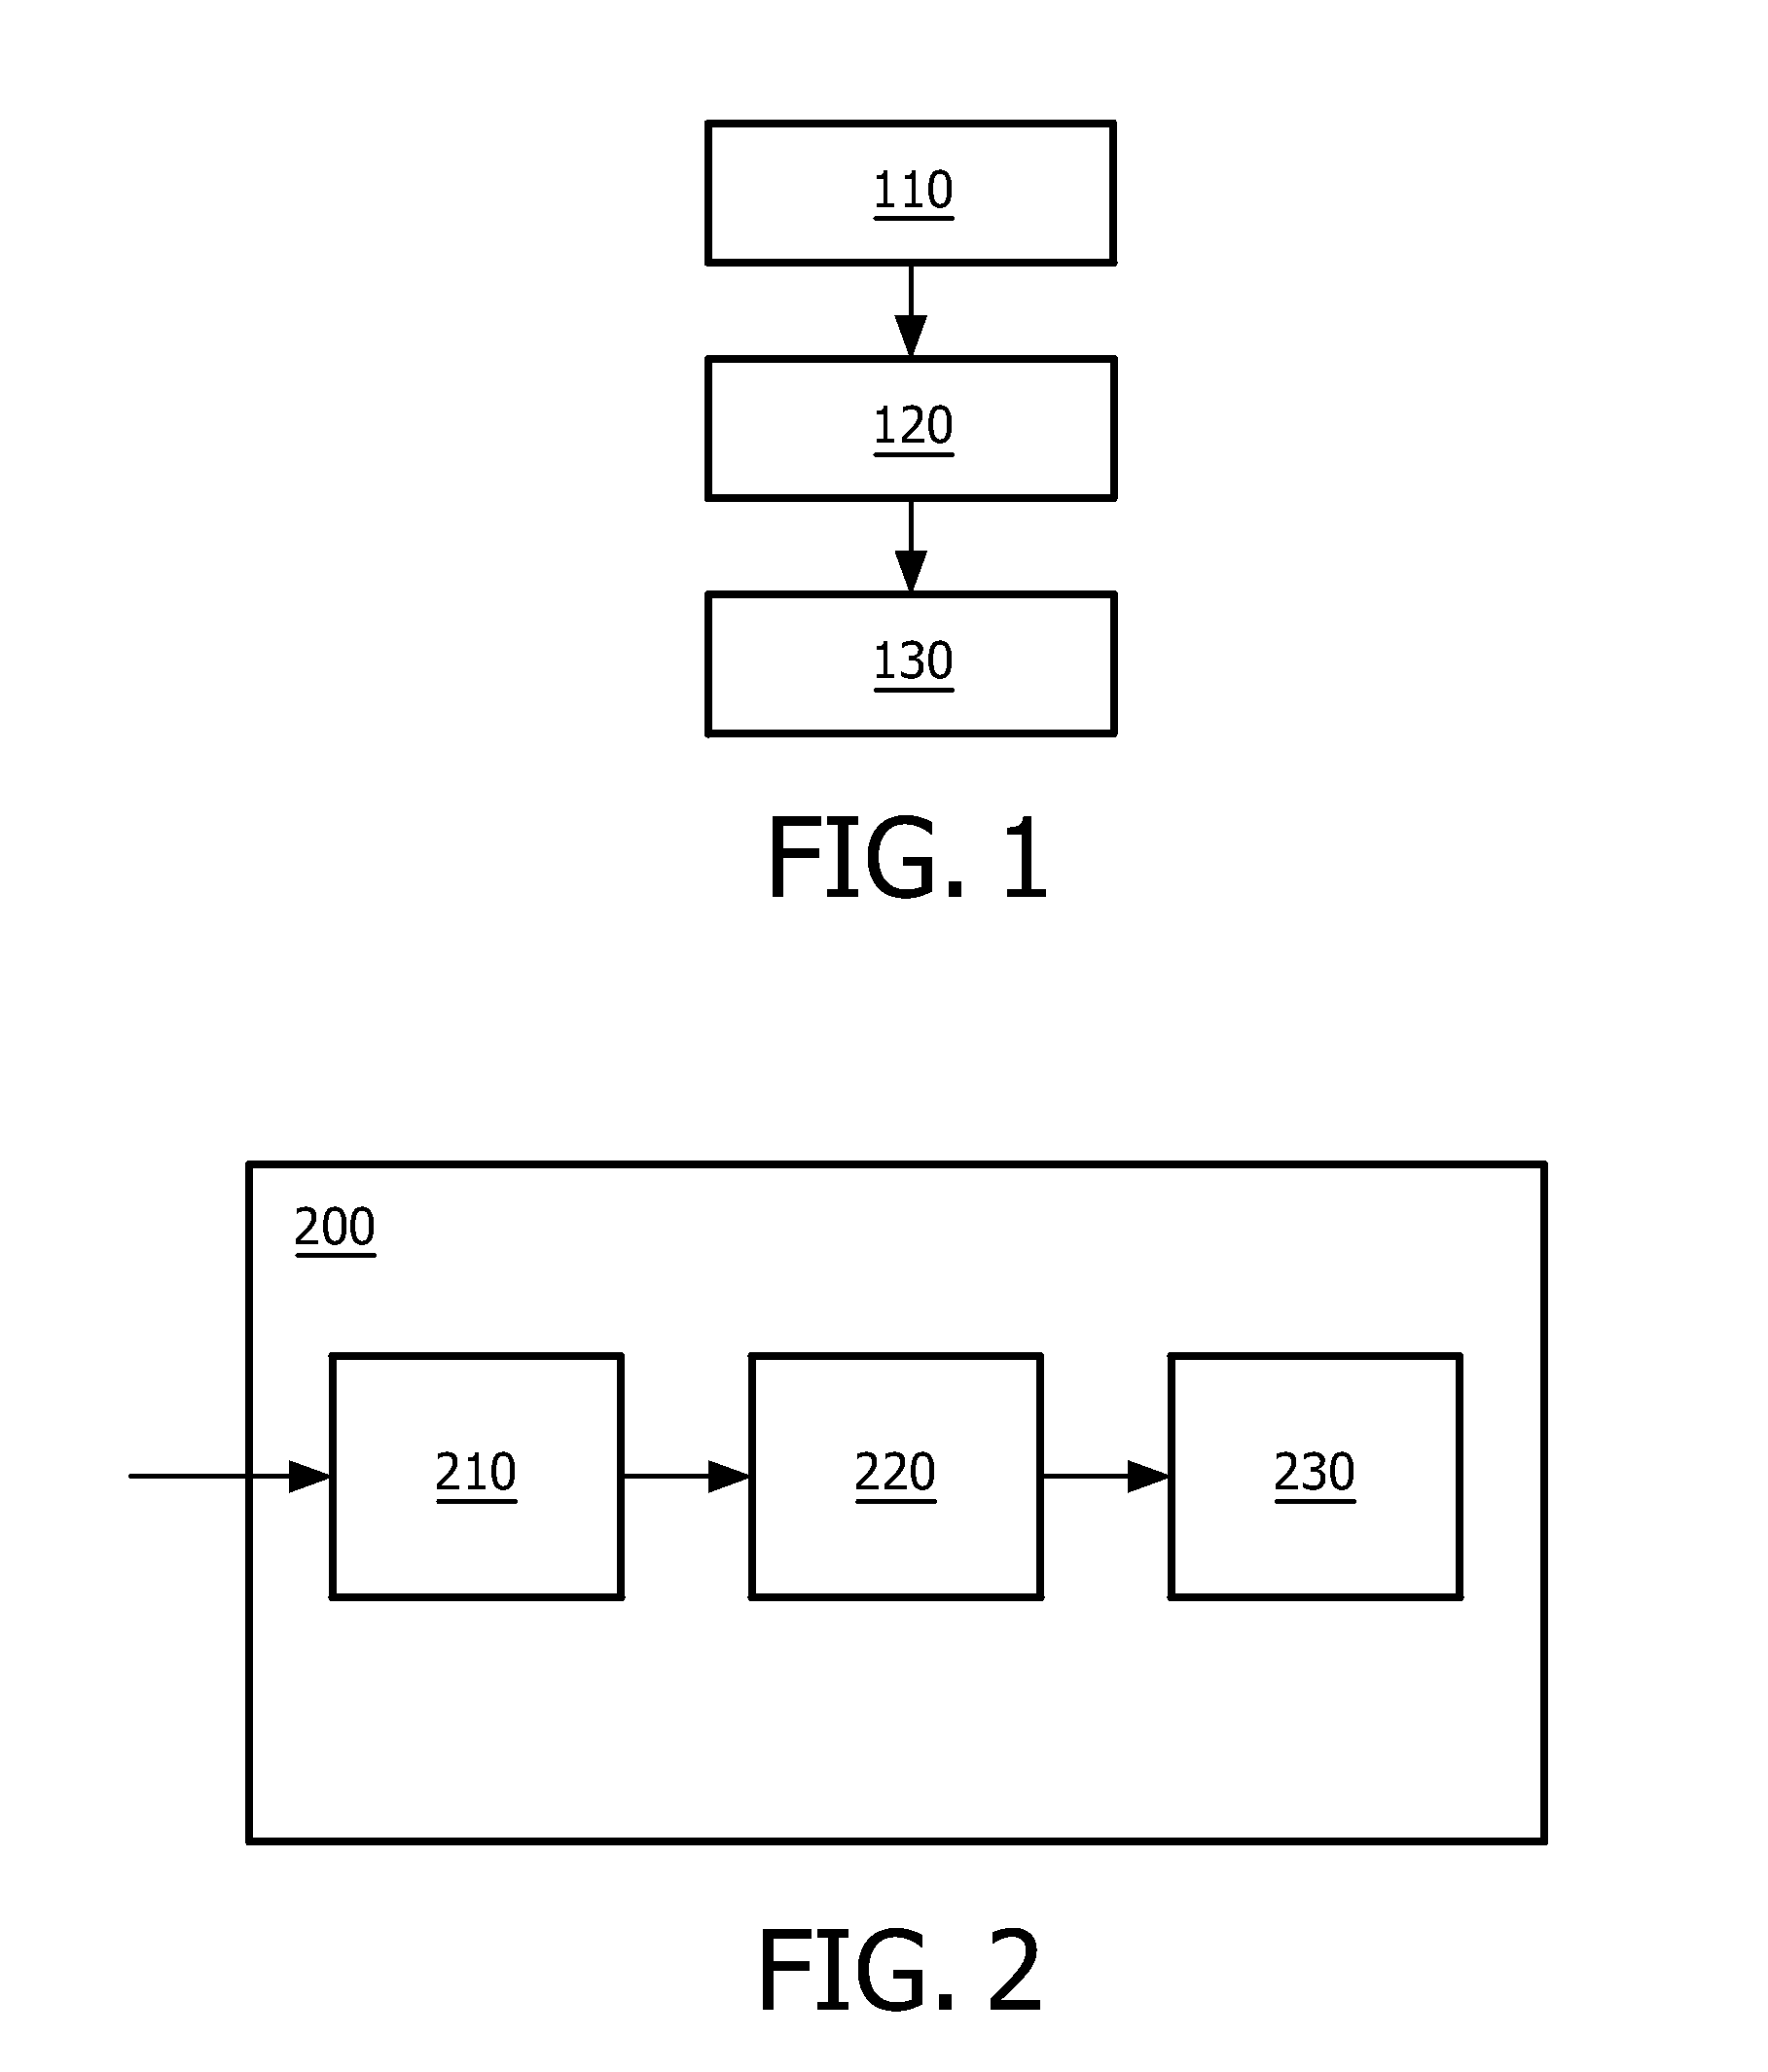 Method and device for inflating a cuff of a non-invasive blood pressure measurement apparatus